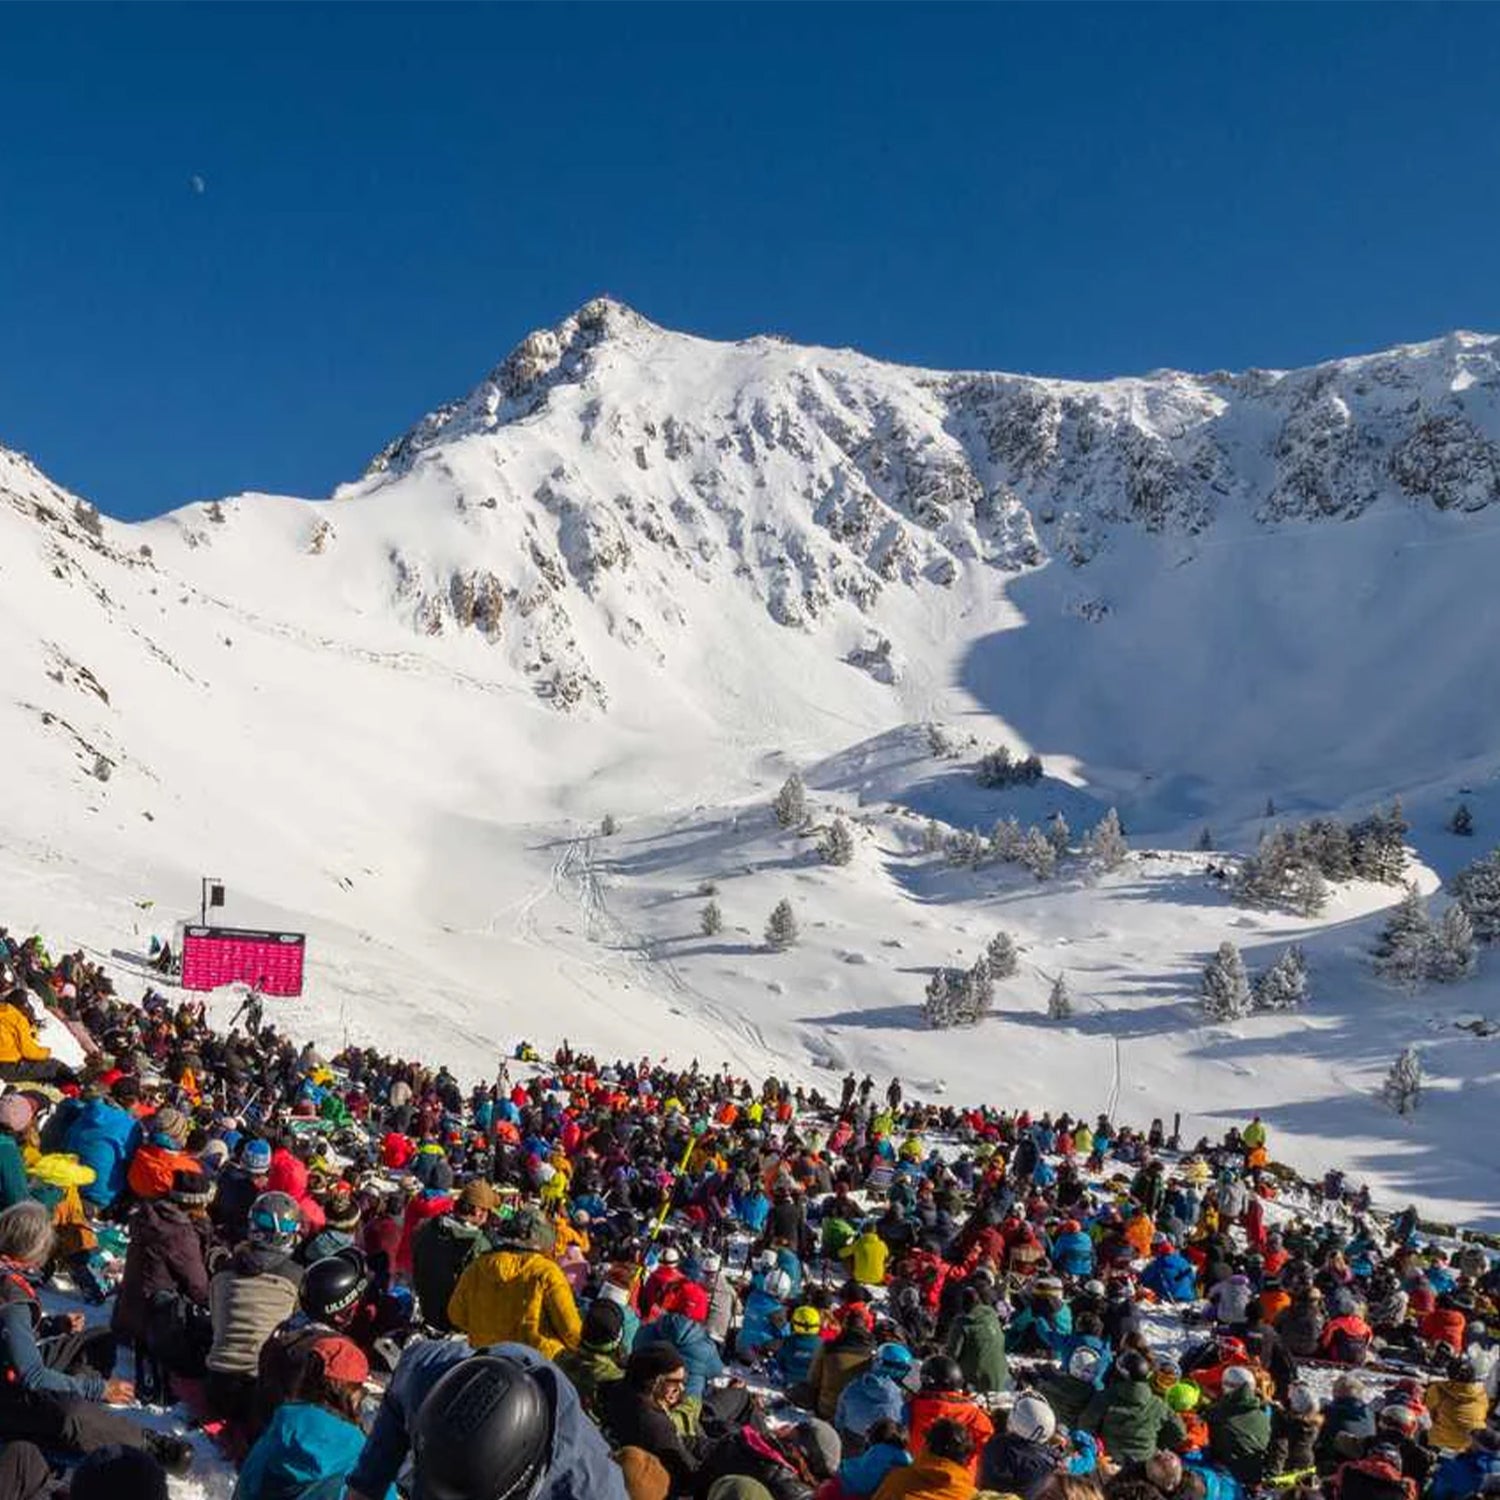 freeride world tour events in europe were canceled for weird weather